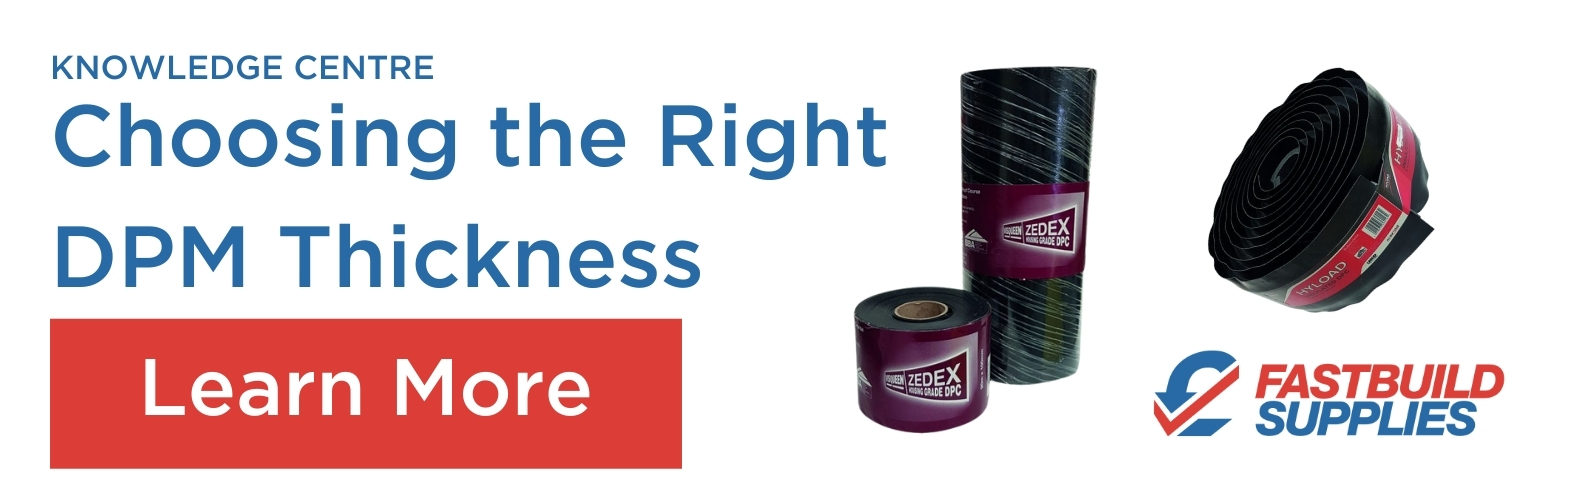 Choosing the right DPM thickness learn more